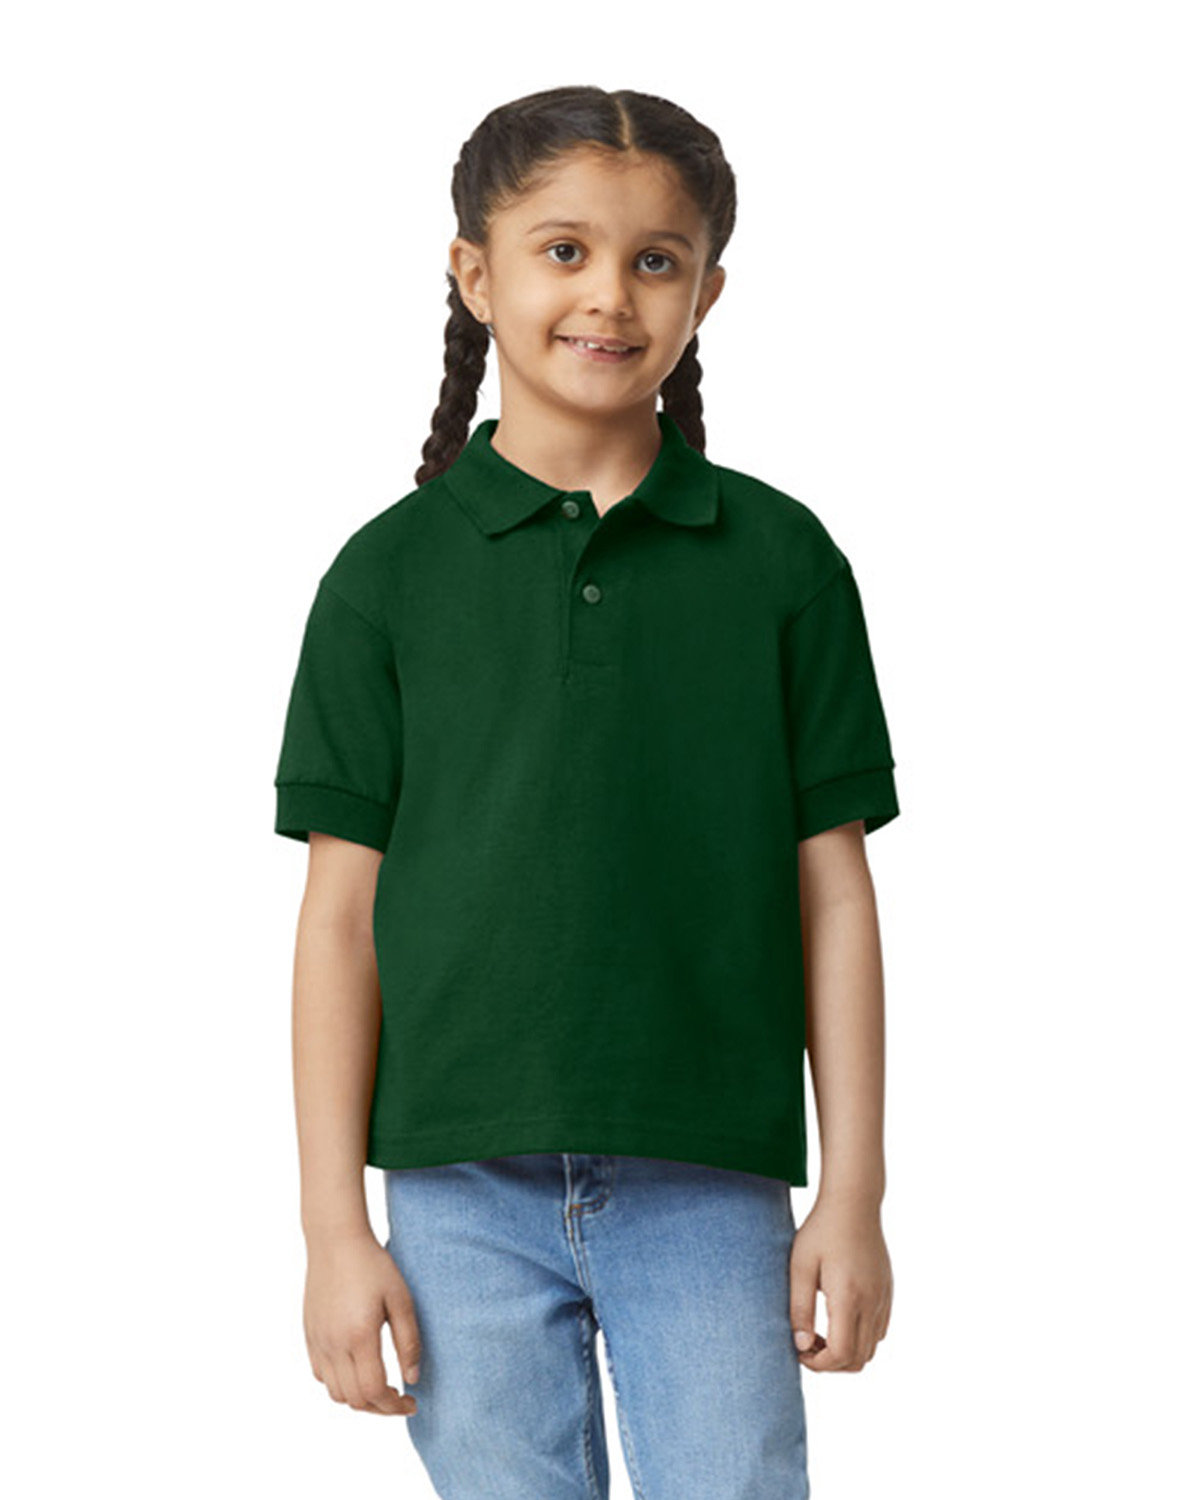 Gildan Youth 6 oz., 50/50 Jersey Polo forest green 